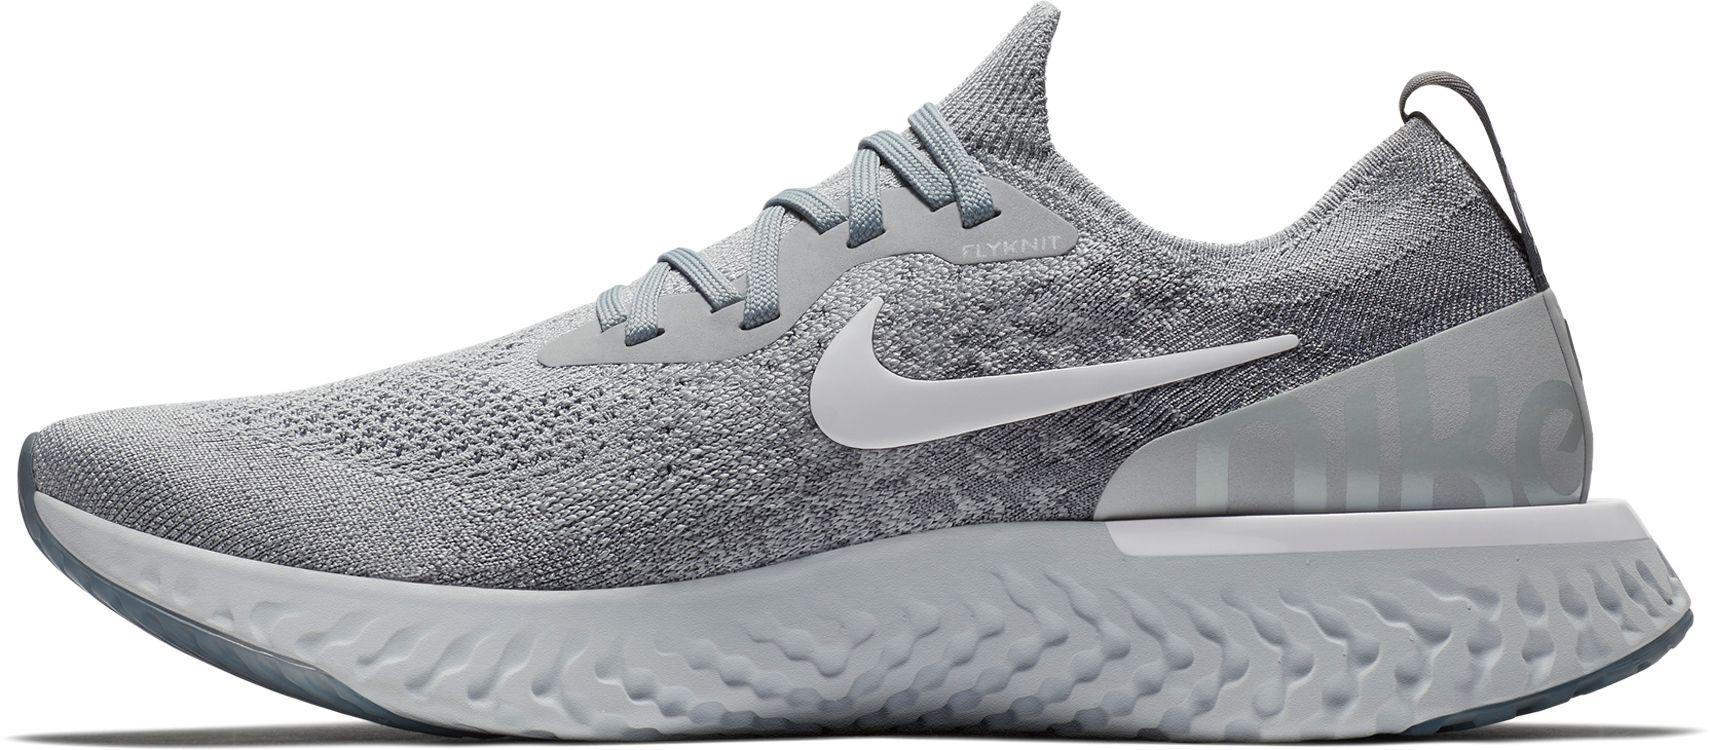 Nike Epic React Flyknit Running Shoes in Gray for Men - Lyst